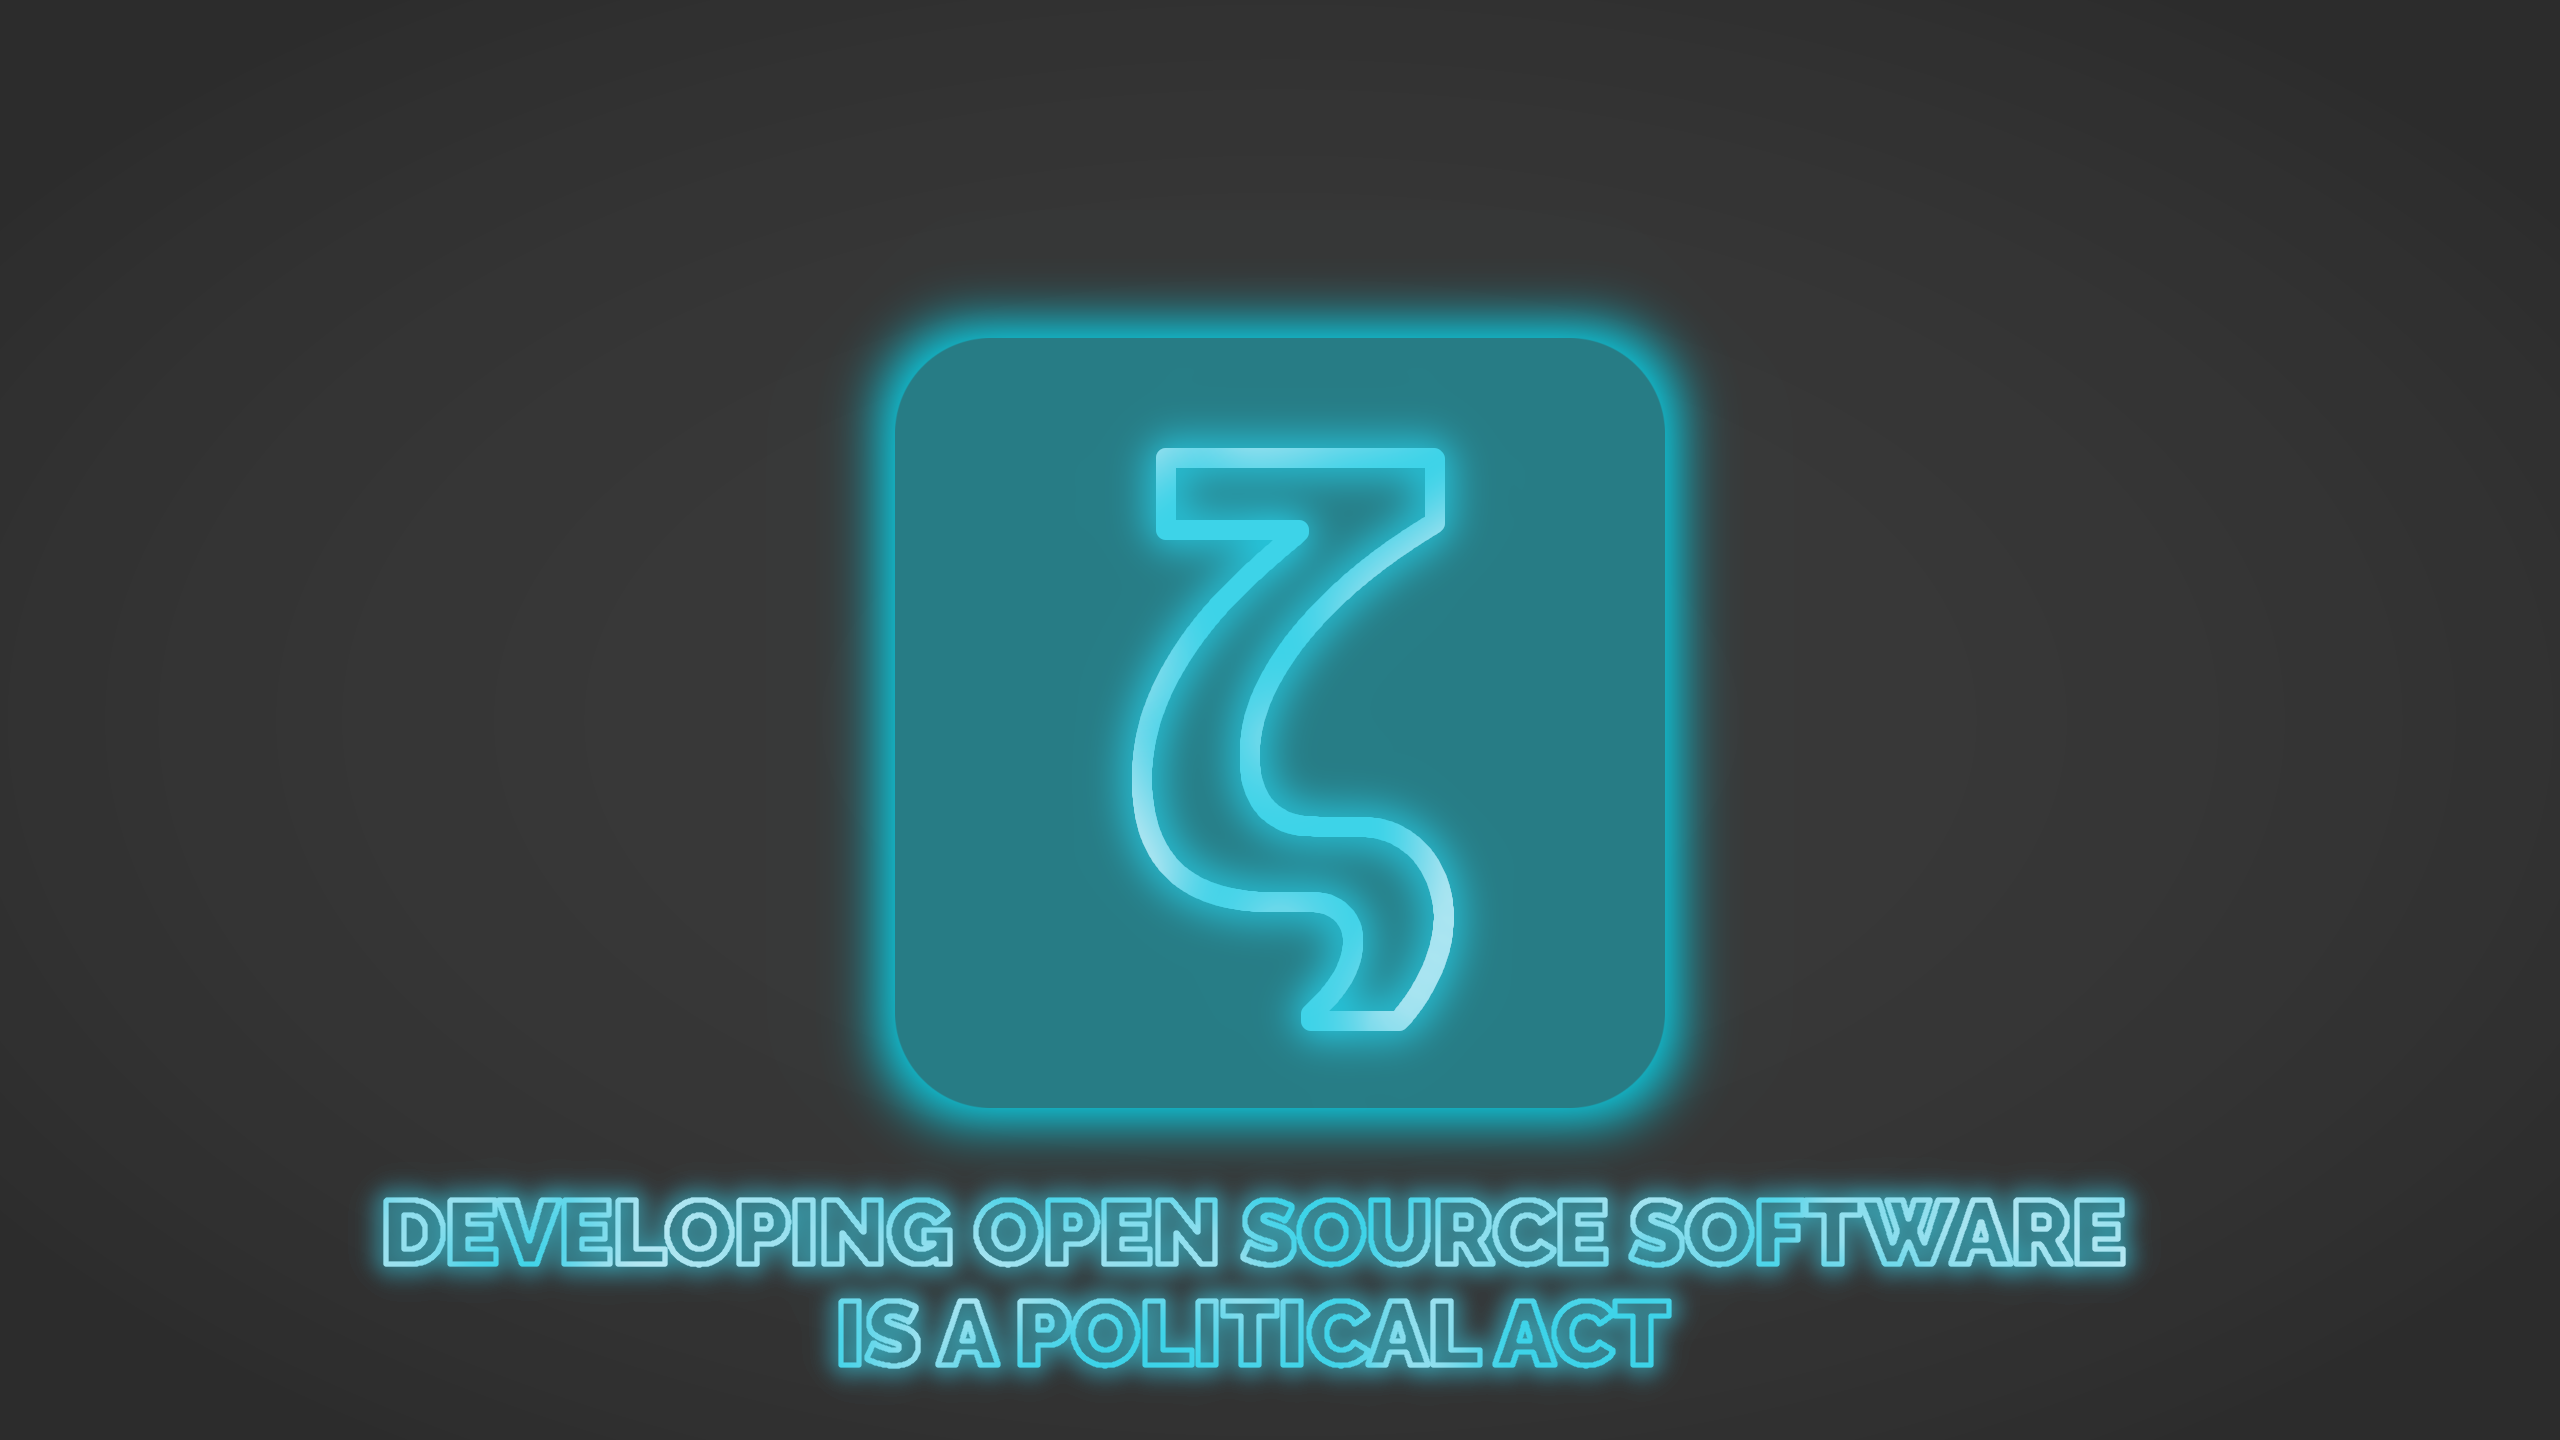 Release: Developing Open Source is a Political Act